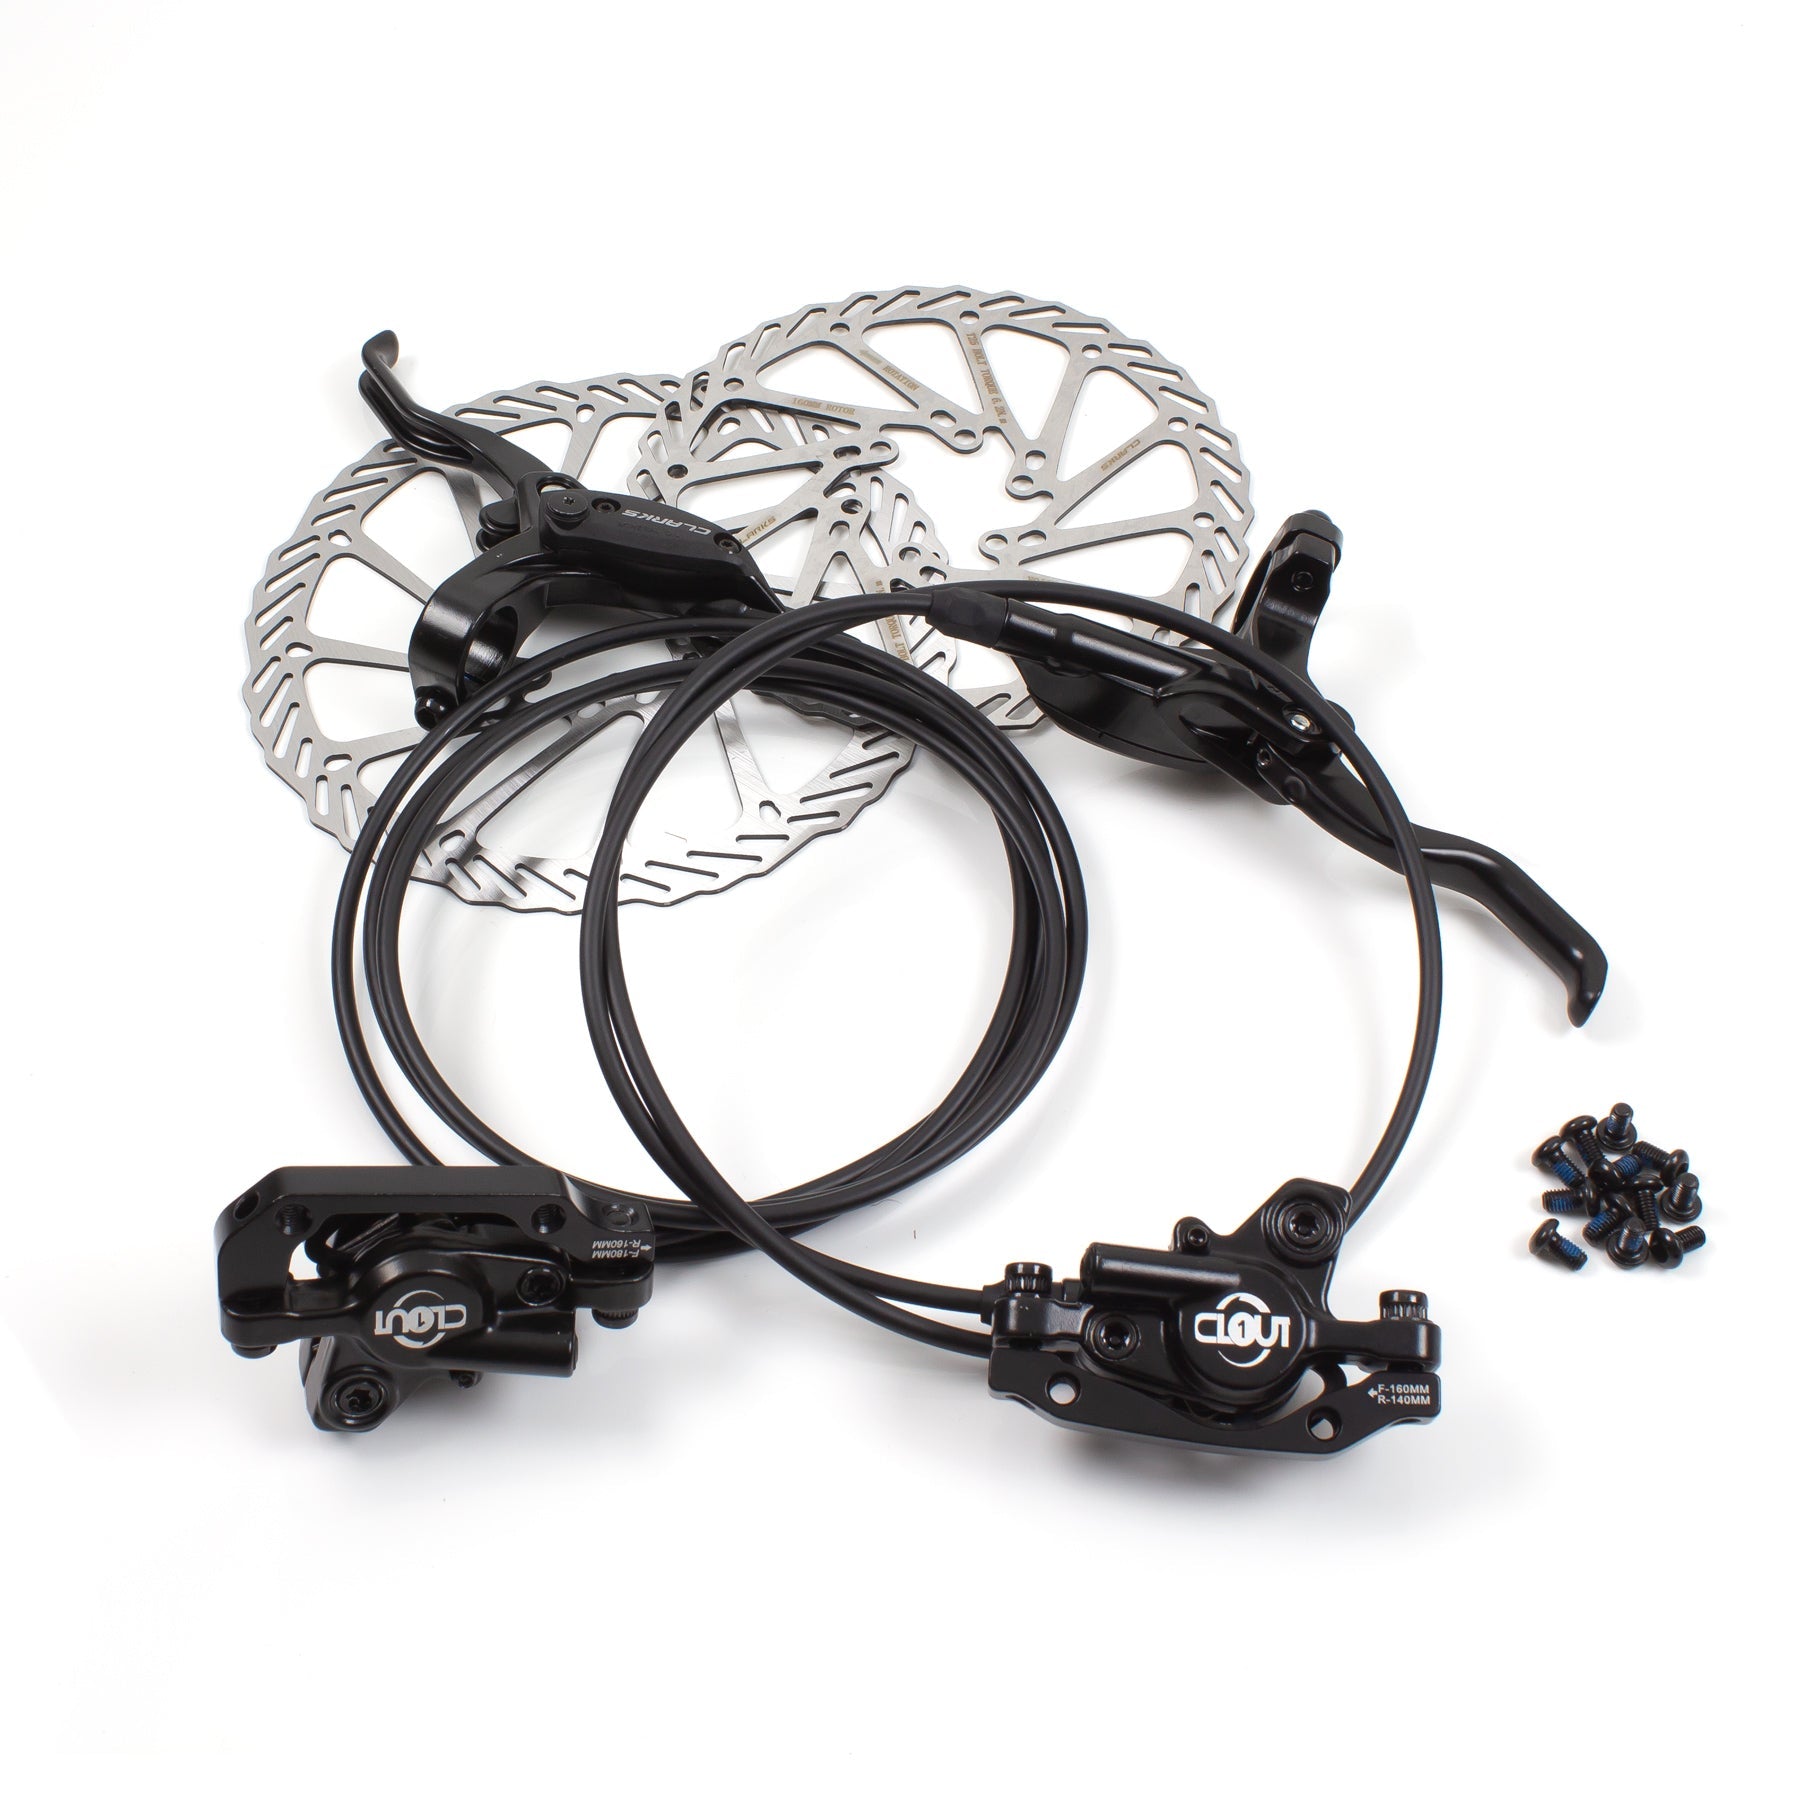 View Clarks Clout1 MTB Hybrid Hydraulic Disc Brake Set Front Rear 180160 information